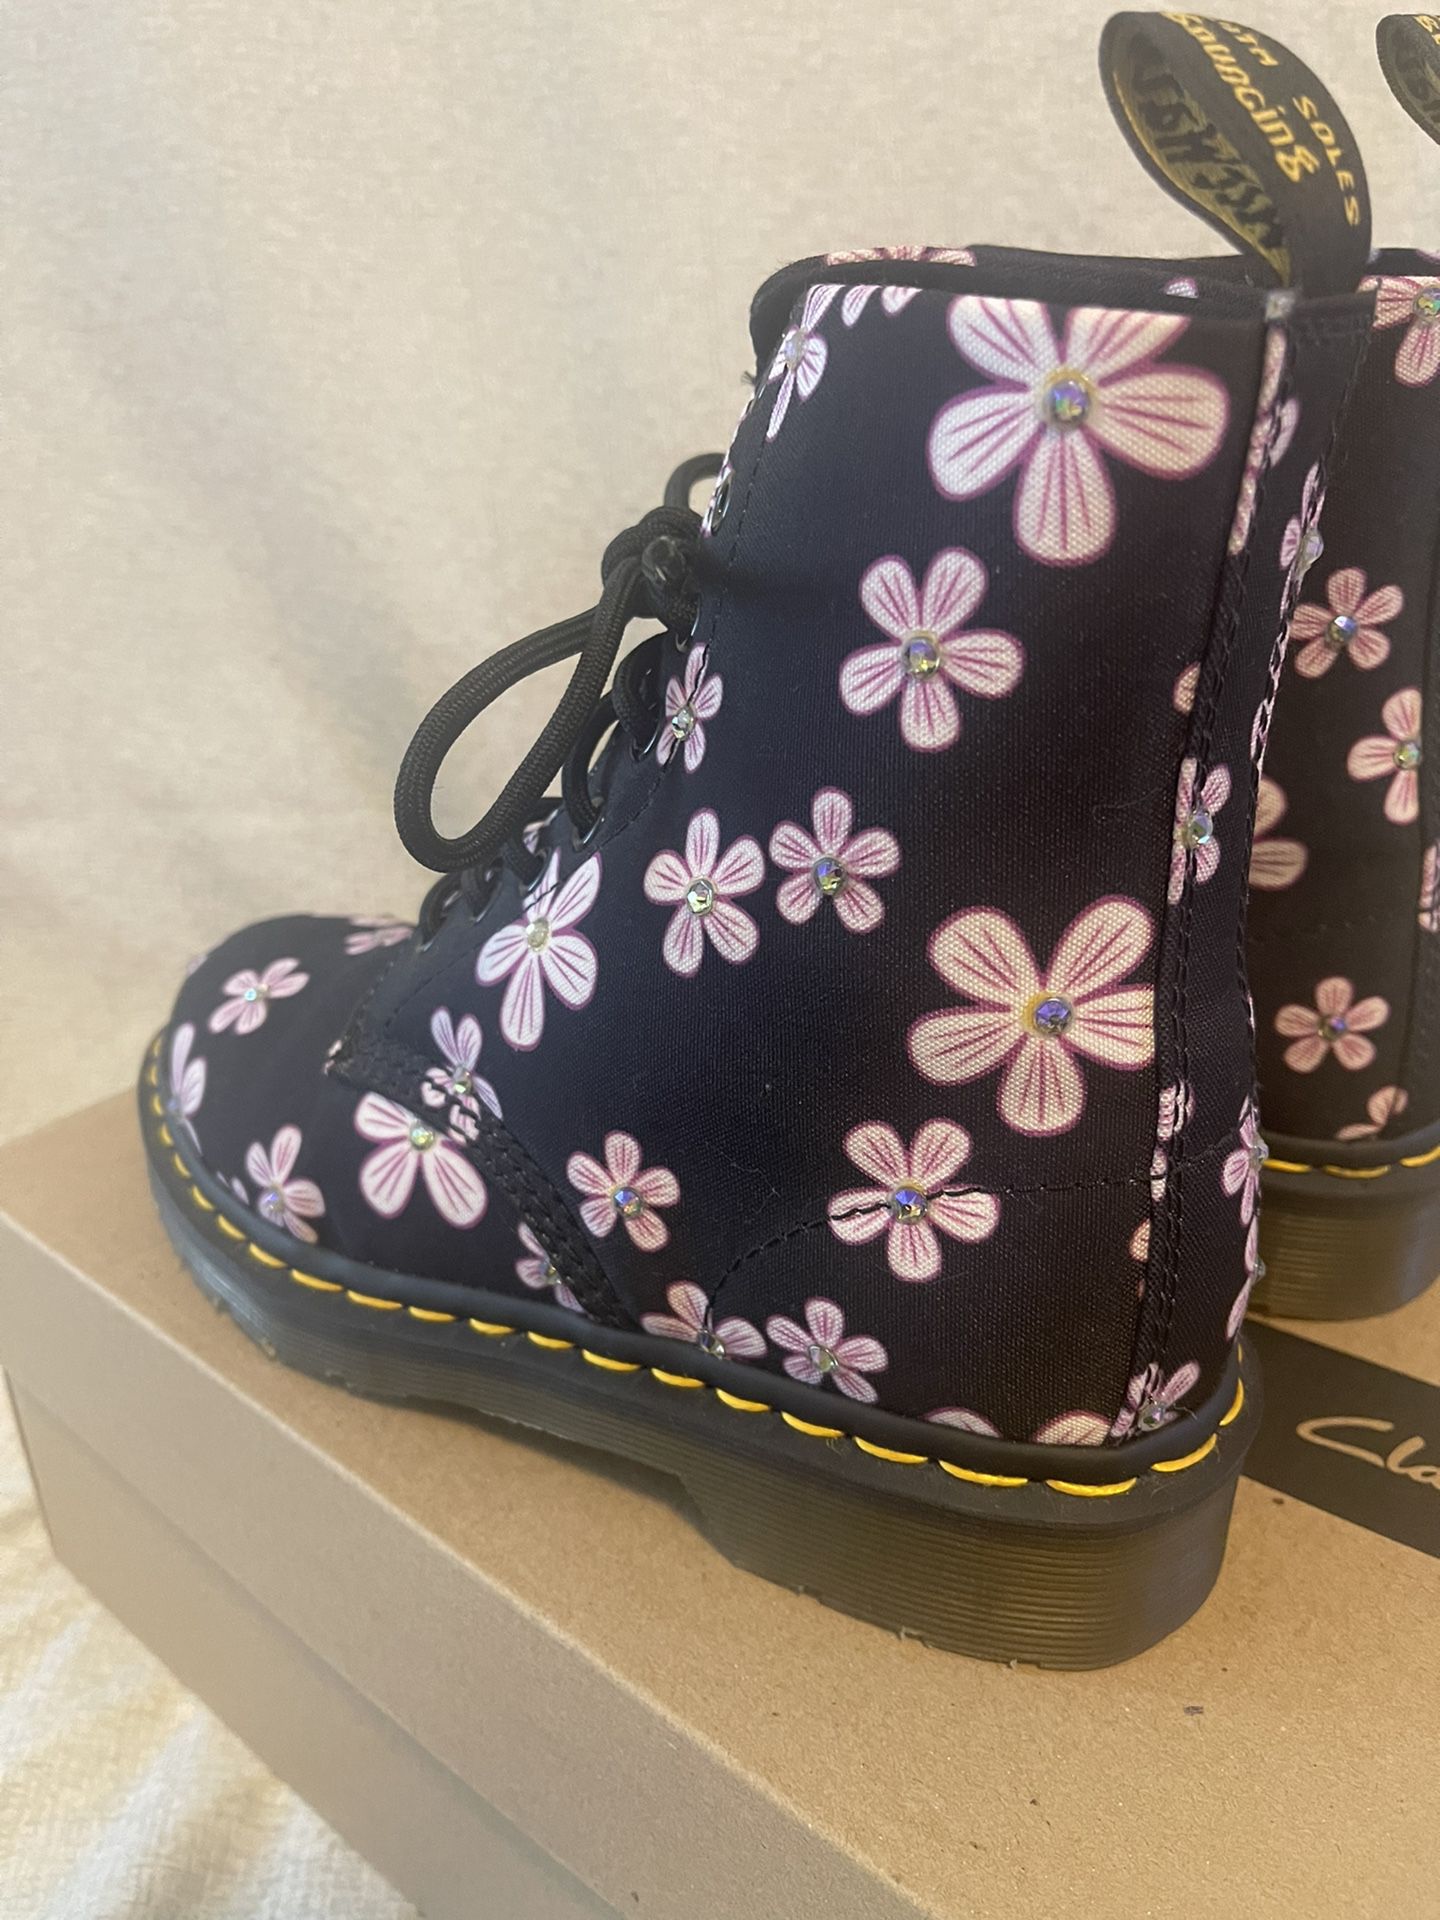 Dr. Martens Size 6 Women Page Meadow Canvas Boots Black Pink Floral Flower